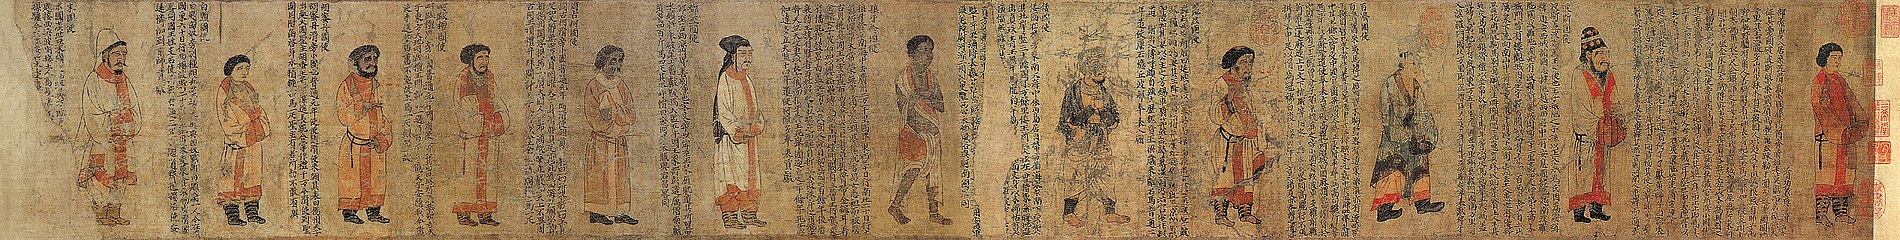 A Song dynasty copy of the Portraits of Periodical Offering of Liang, dated to the 6th century, depicting ambassadors from various tributary states